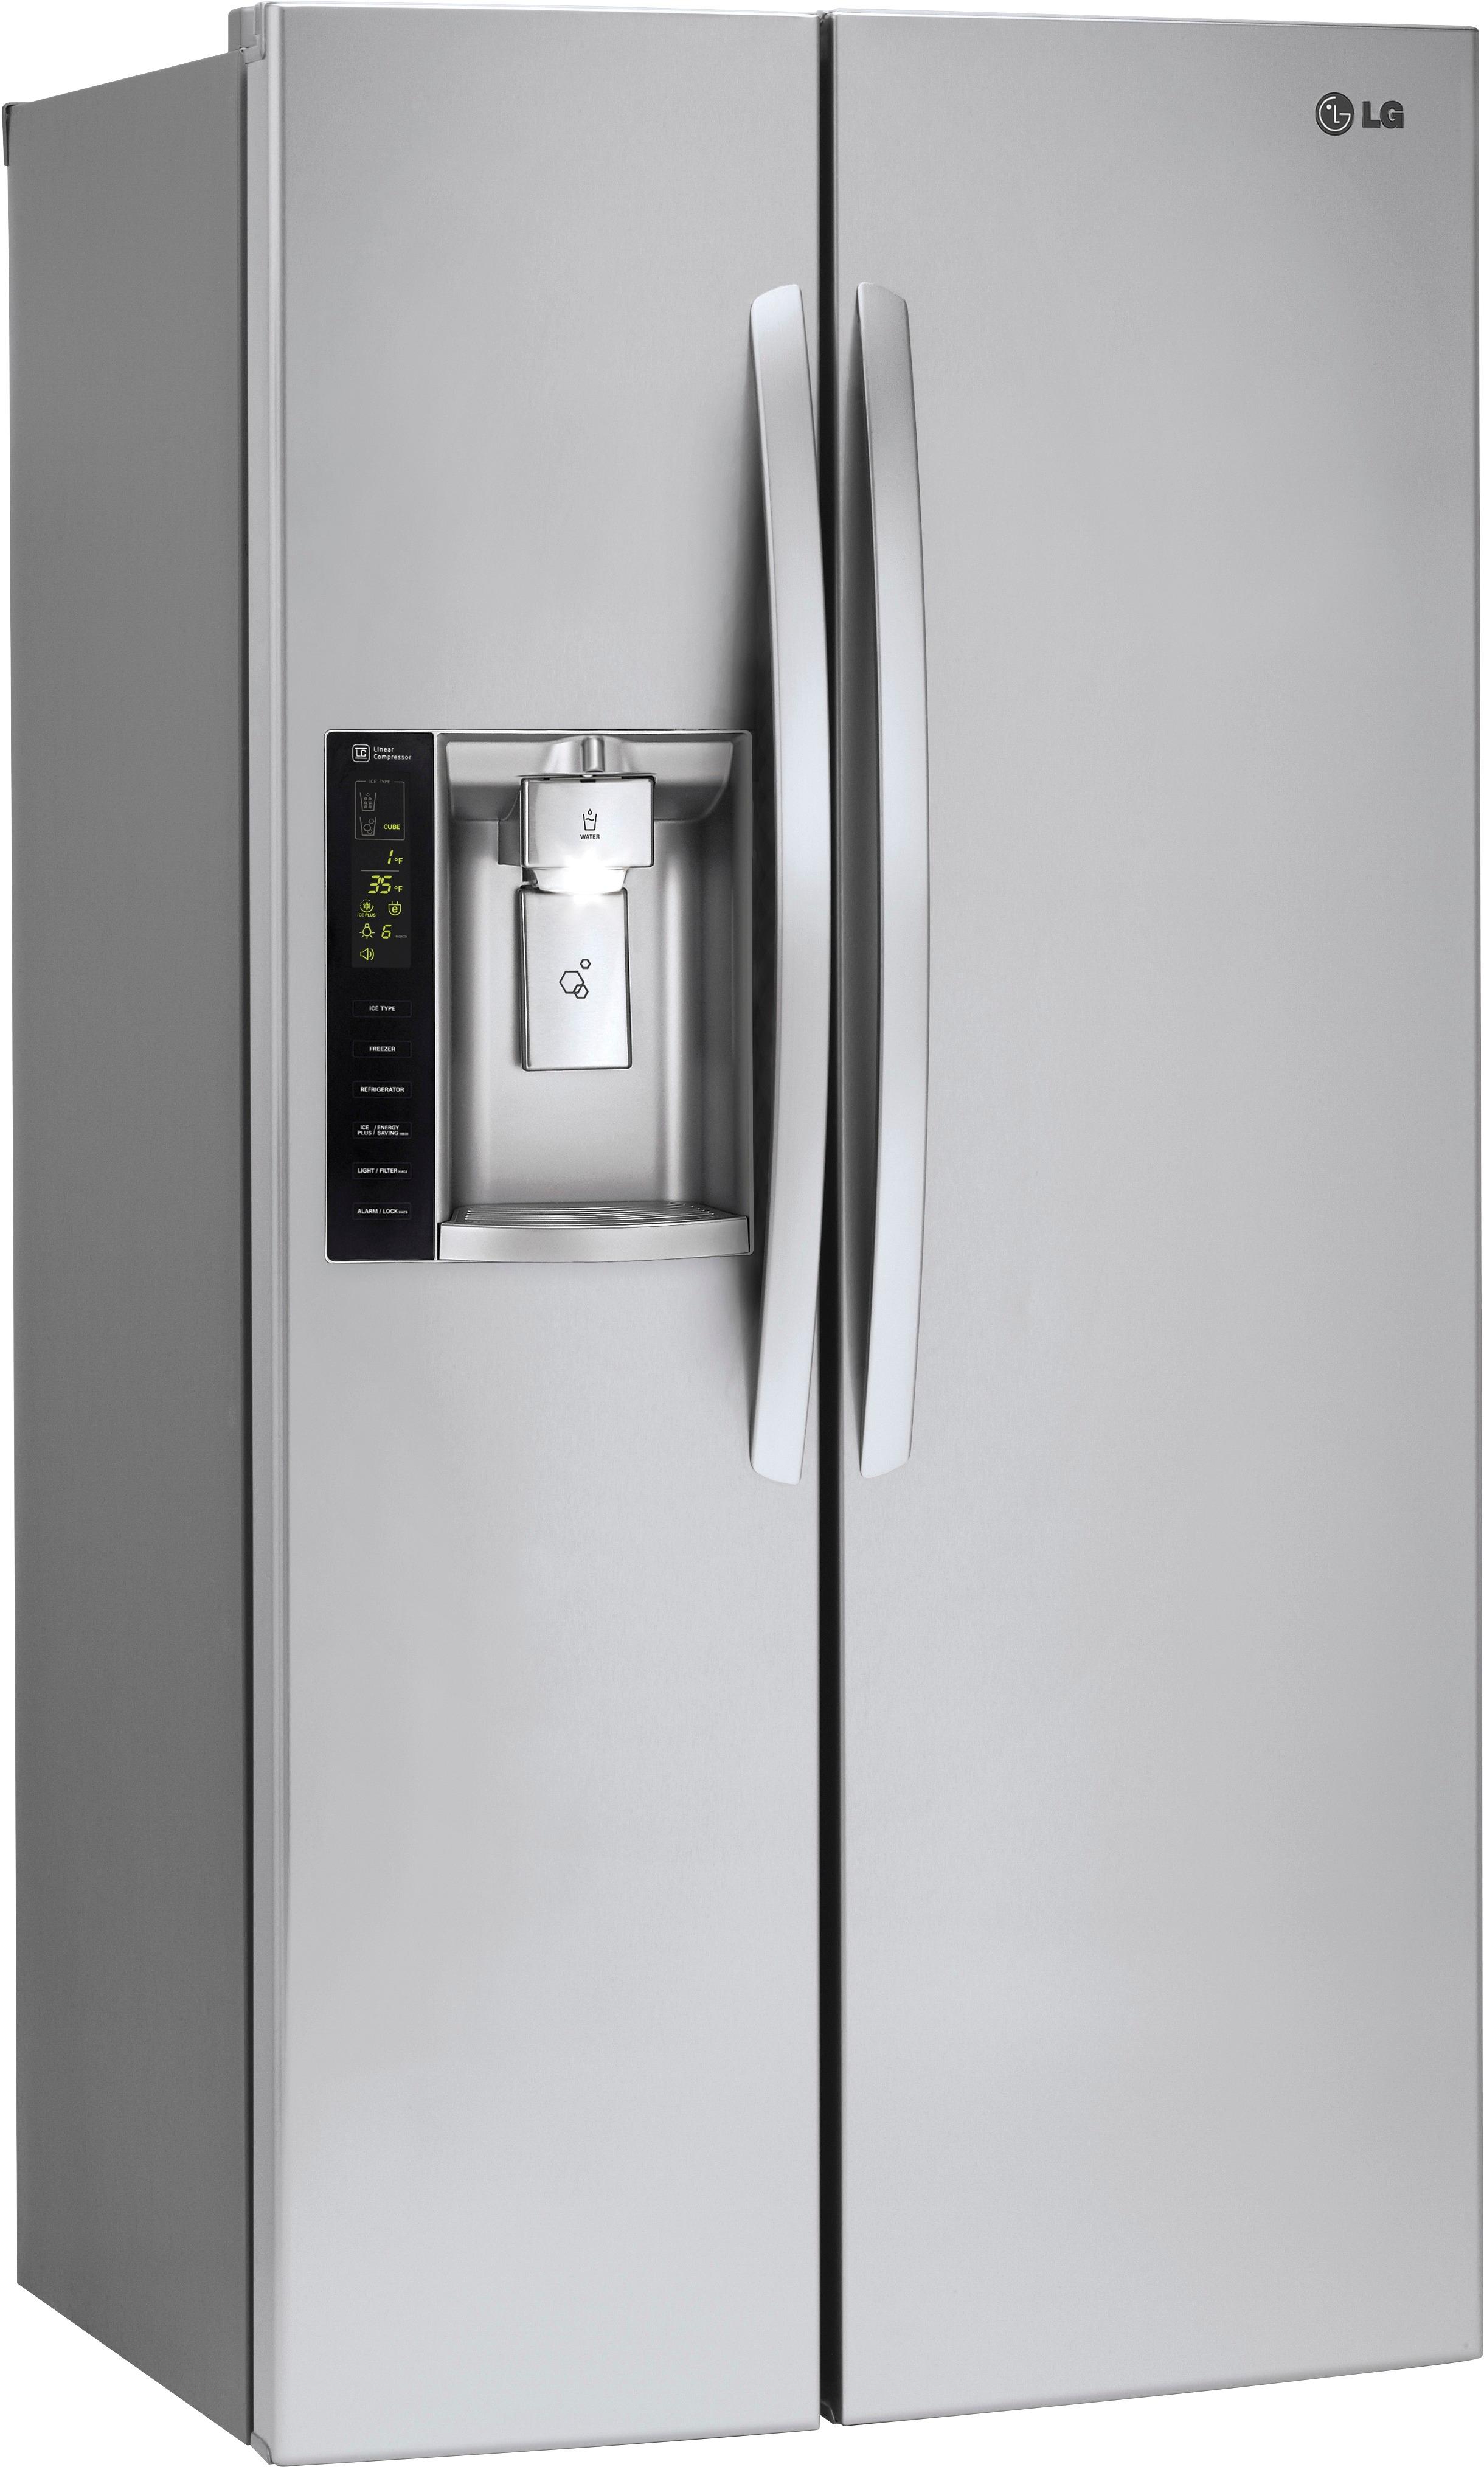 Angle View: LG - 26.2 Cu. Ft. Side-by-Side Refrigerator with Thru-the-Door Ice and Water - Stainless steel